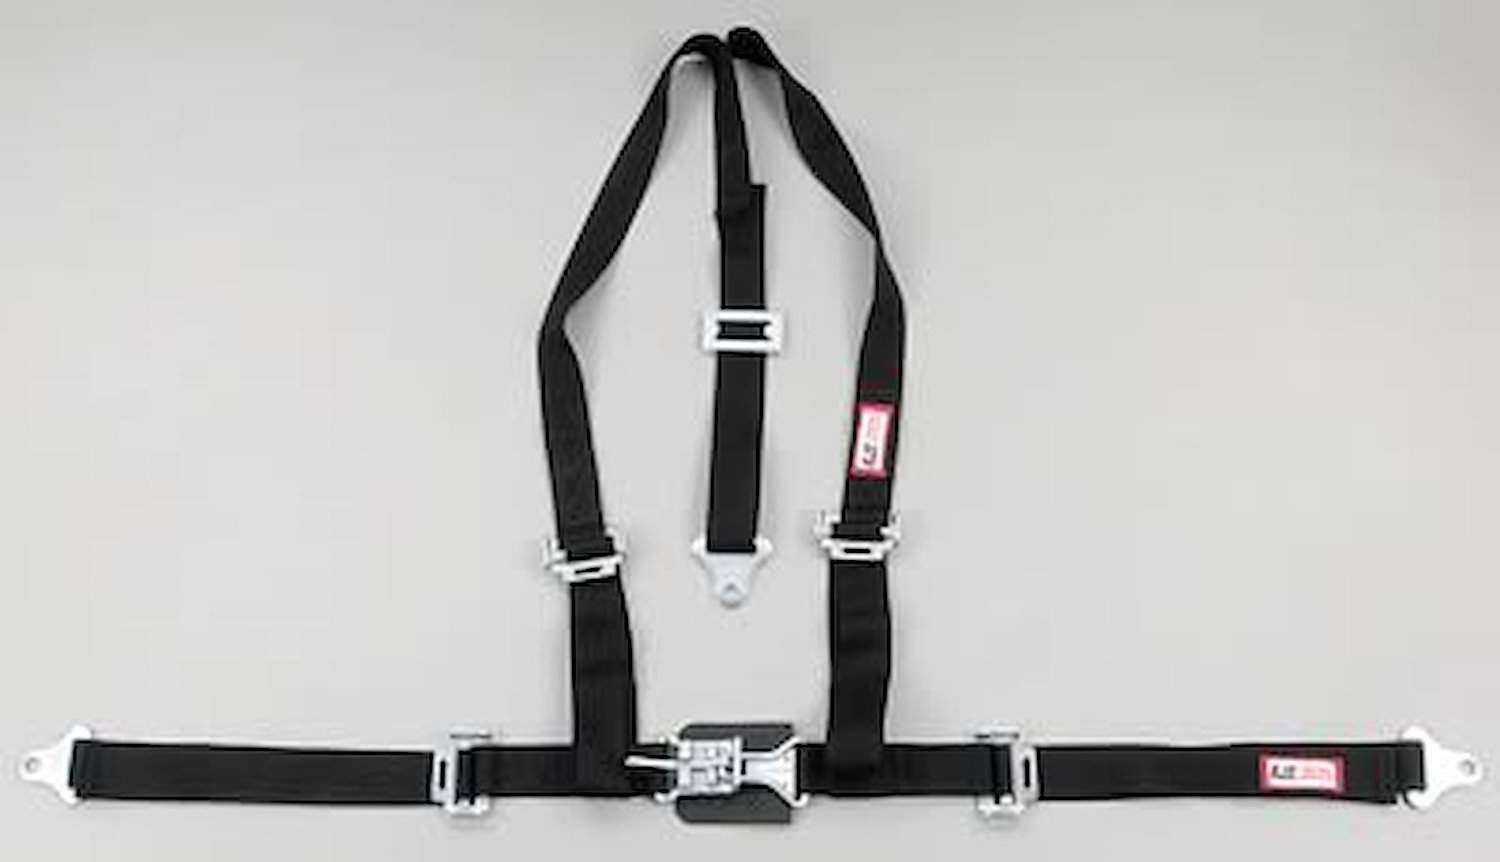 NON-SFI L&L HARNESS 3 PULL UP Lap Belt w/adjuster 2 S.H. V ROLL BAR Mount ALL SNAP ENDS RED